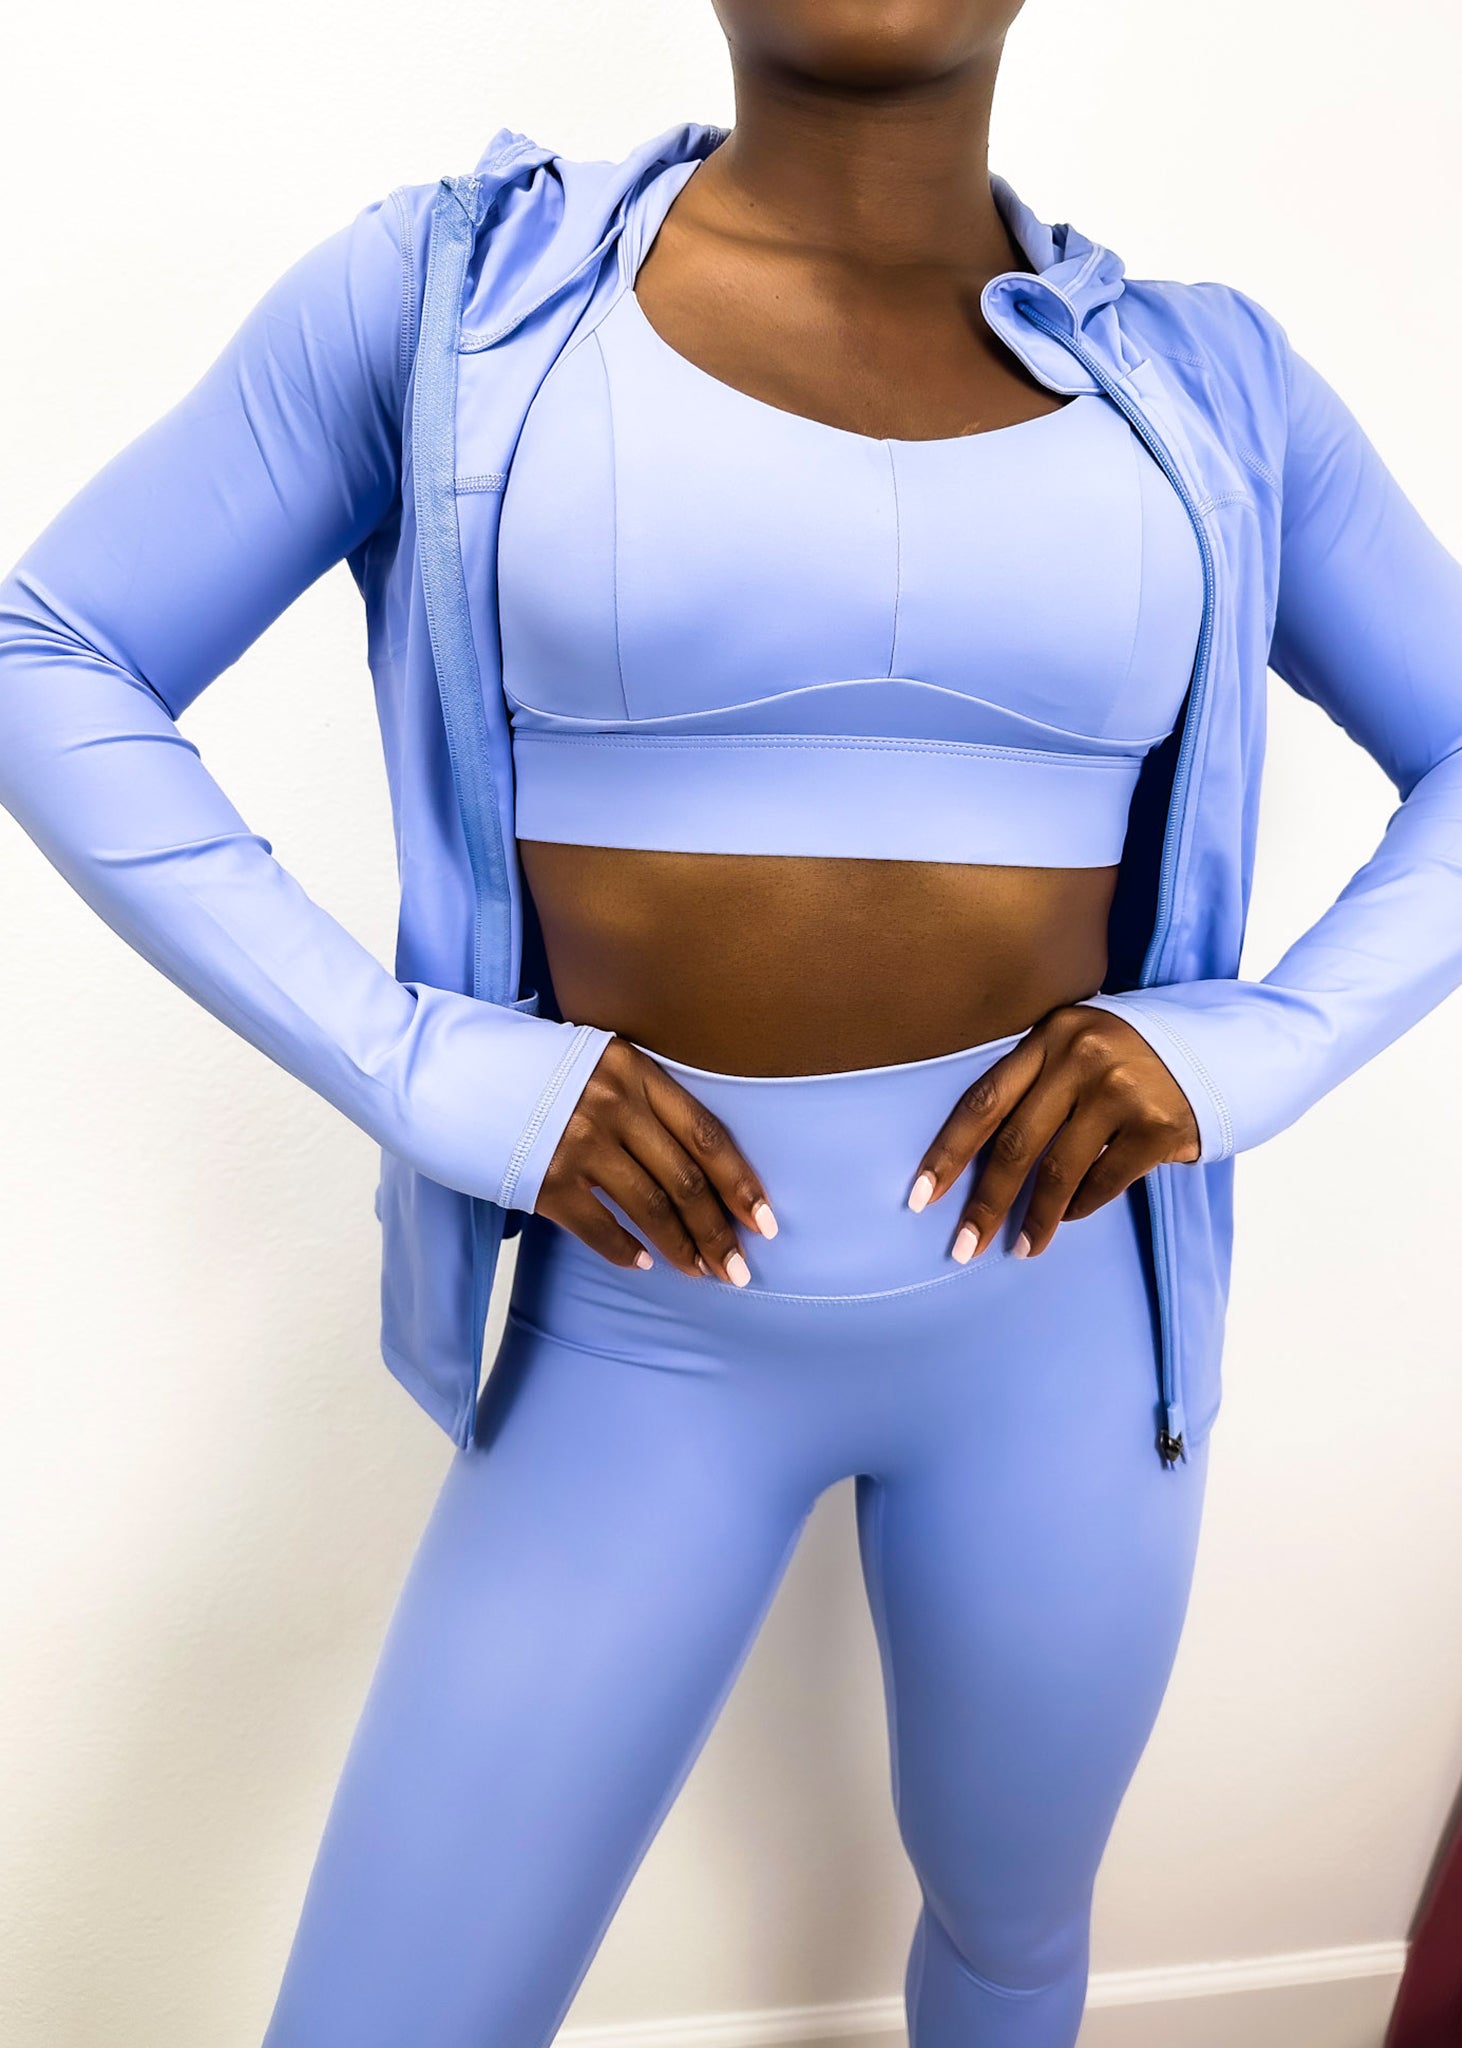 Three-Piece Hooded Zip Jacket, Sports Bra, and High-Rise Yoga